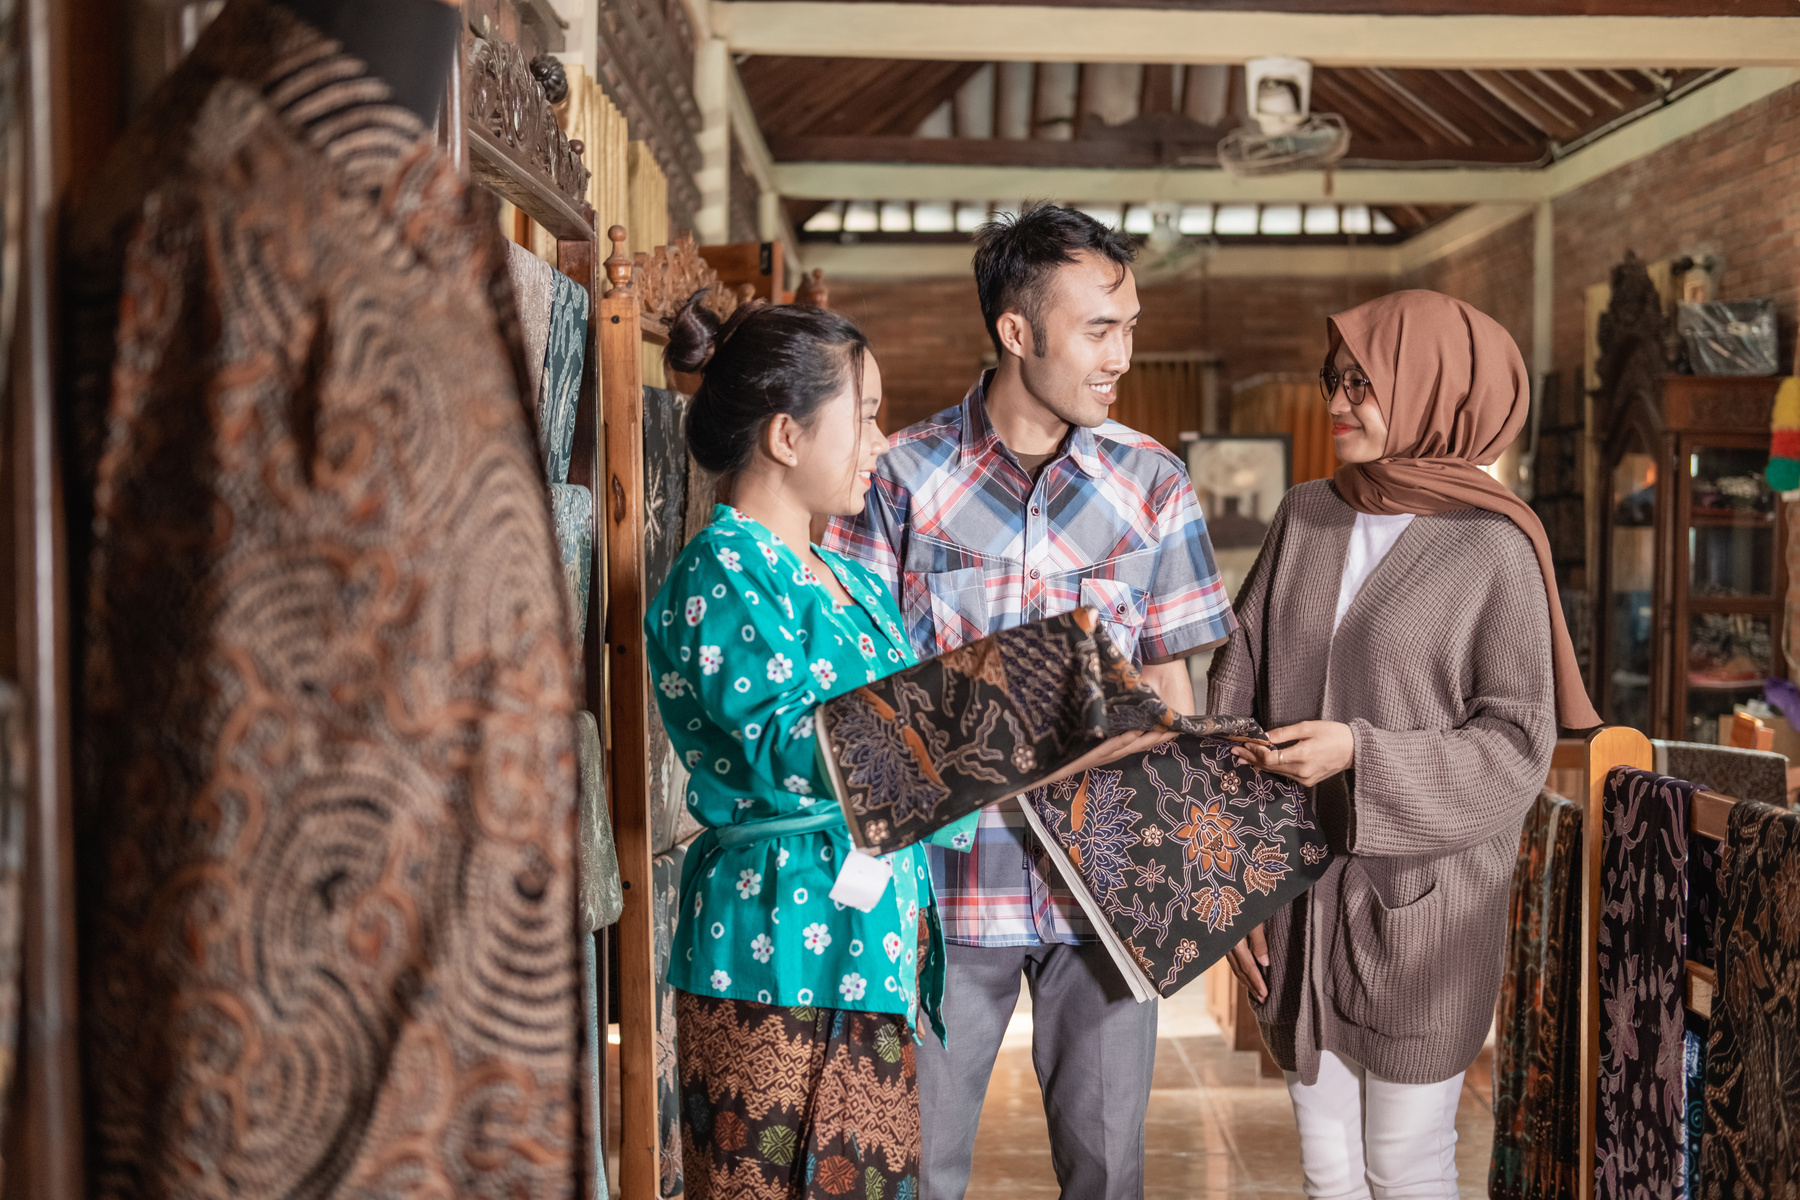 Woman Showing the Traditional Batik Cloth She Sells to Customer